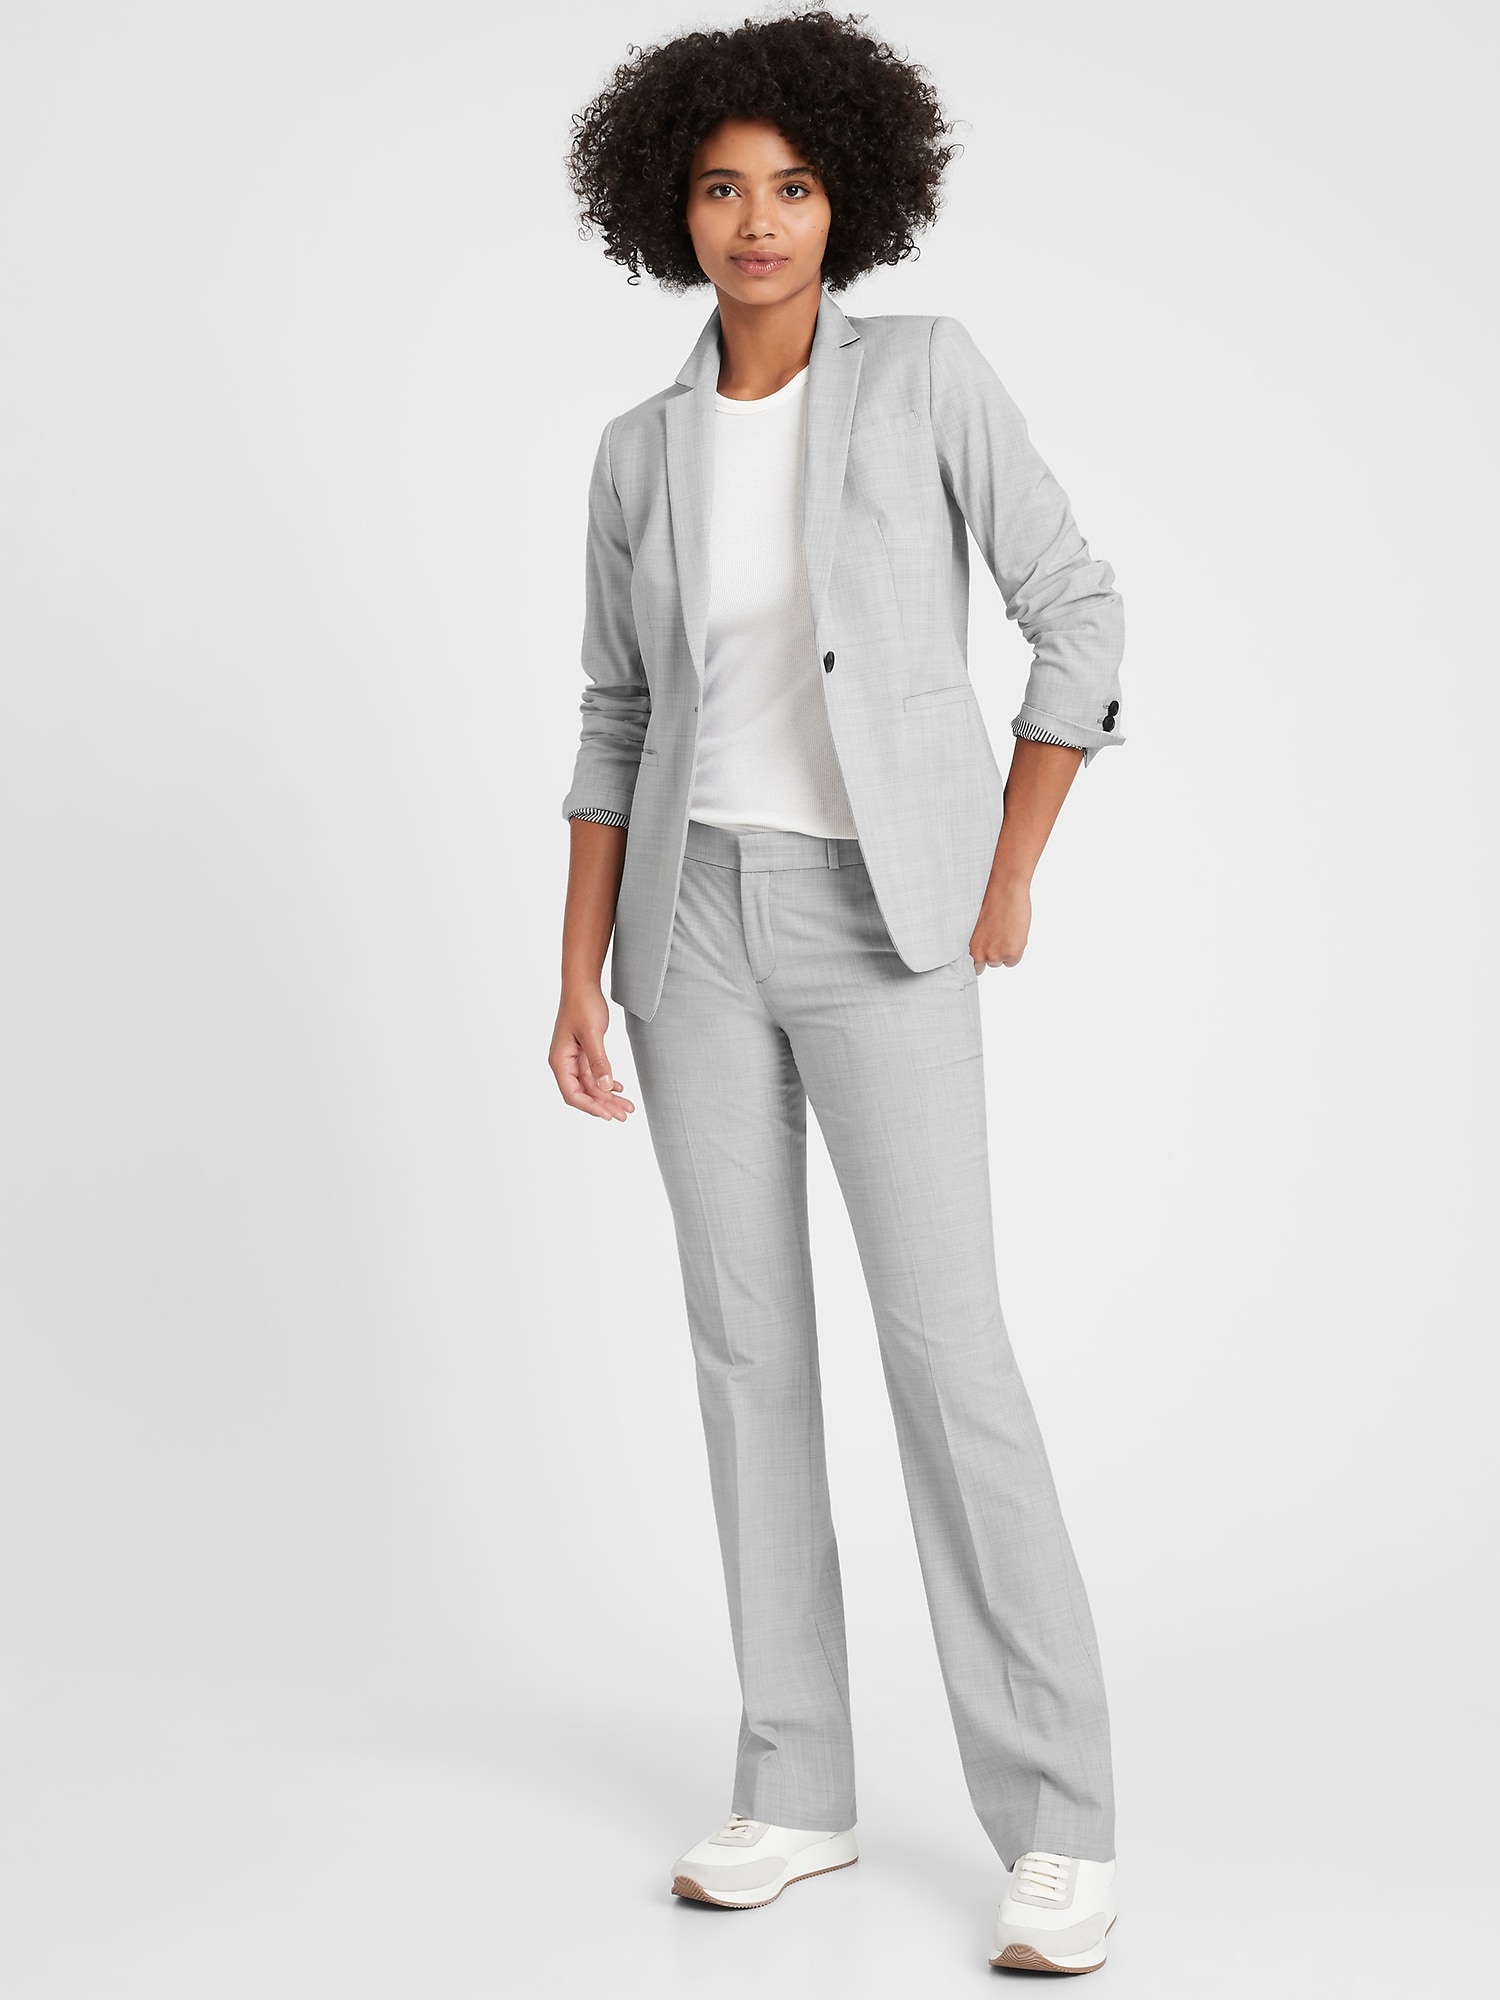 Long and Lean-Fit Washable Wool-Blend Blazer